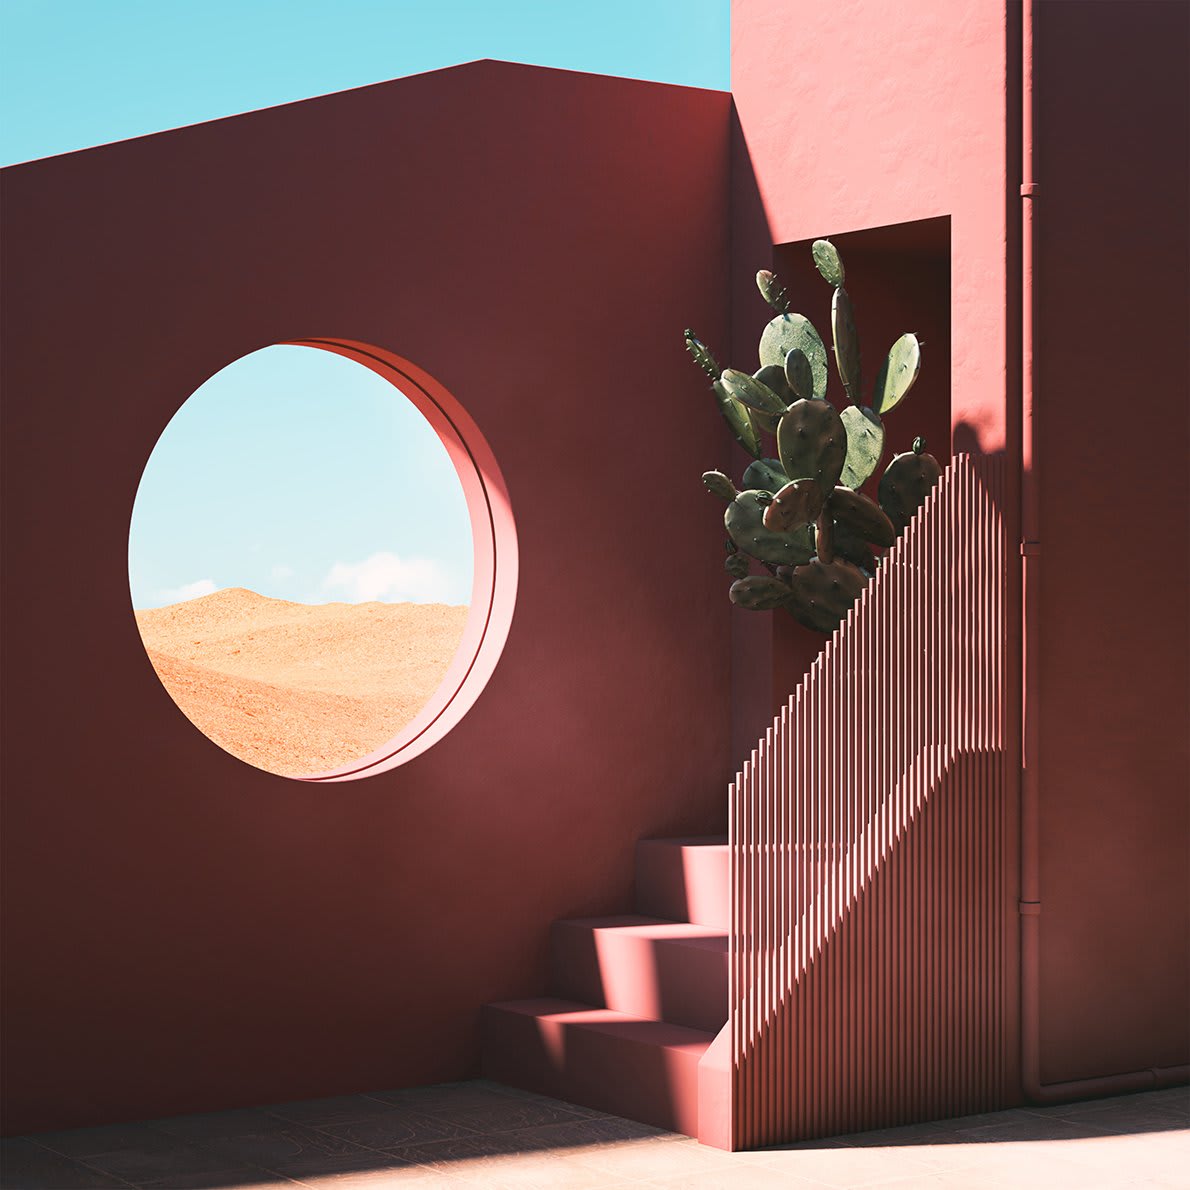 “There is something so pleasing about these impossible, utopian environments, and of course that’s not an accident.” See more of these stunning architectural dreamscapes here: